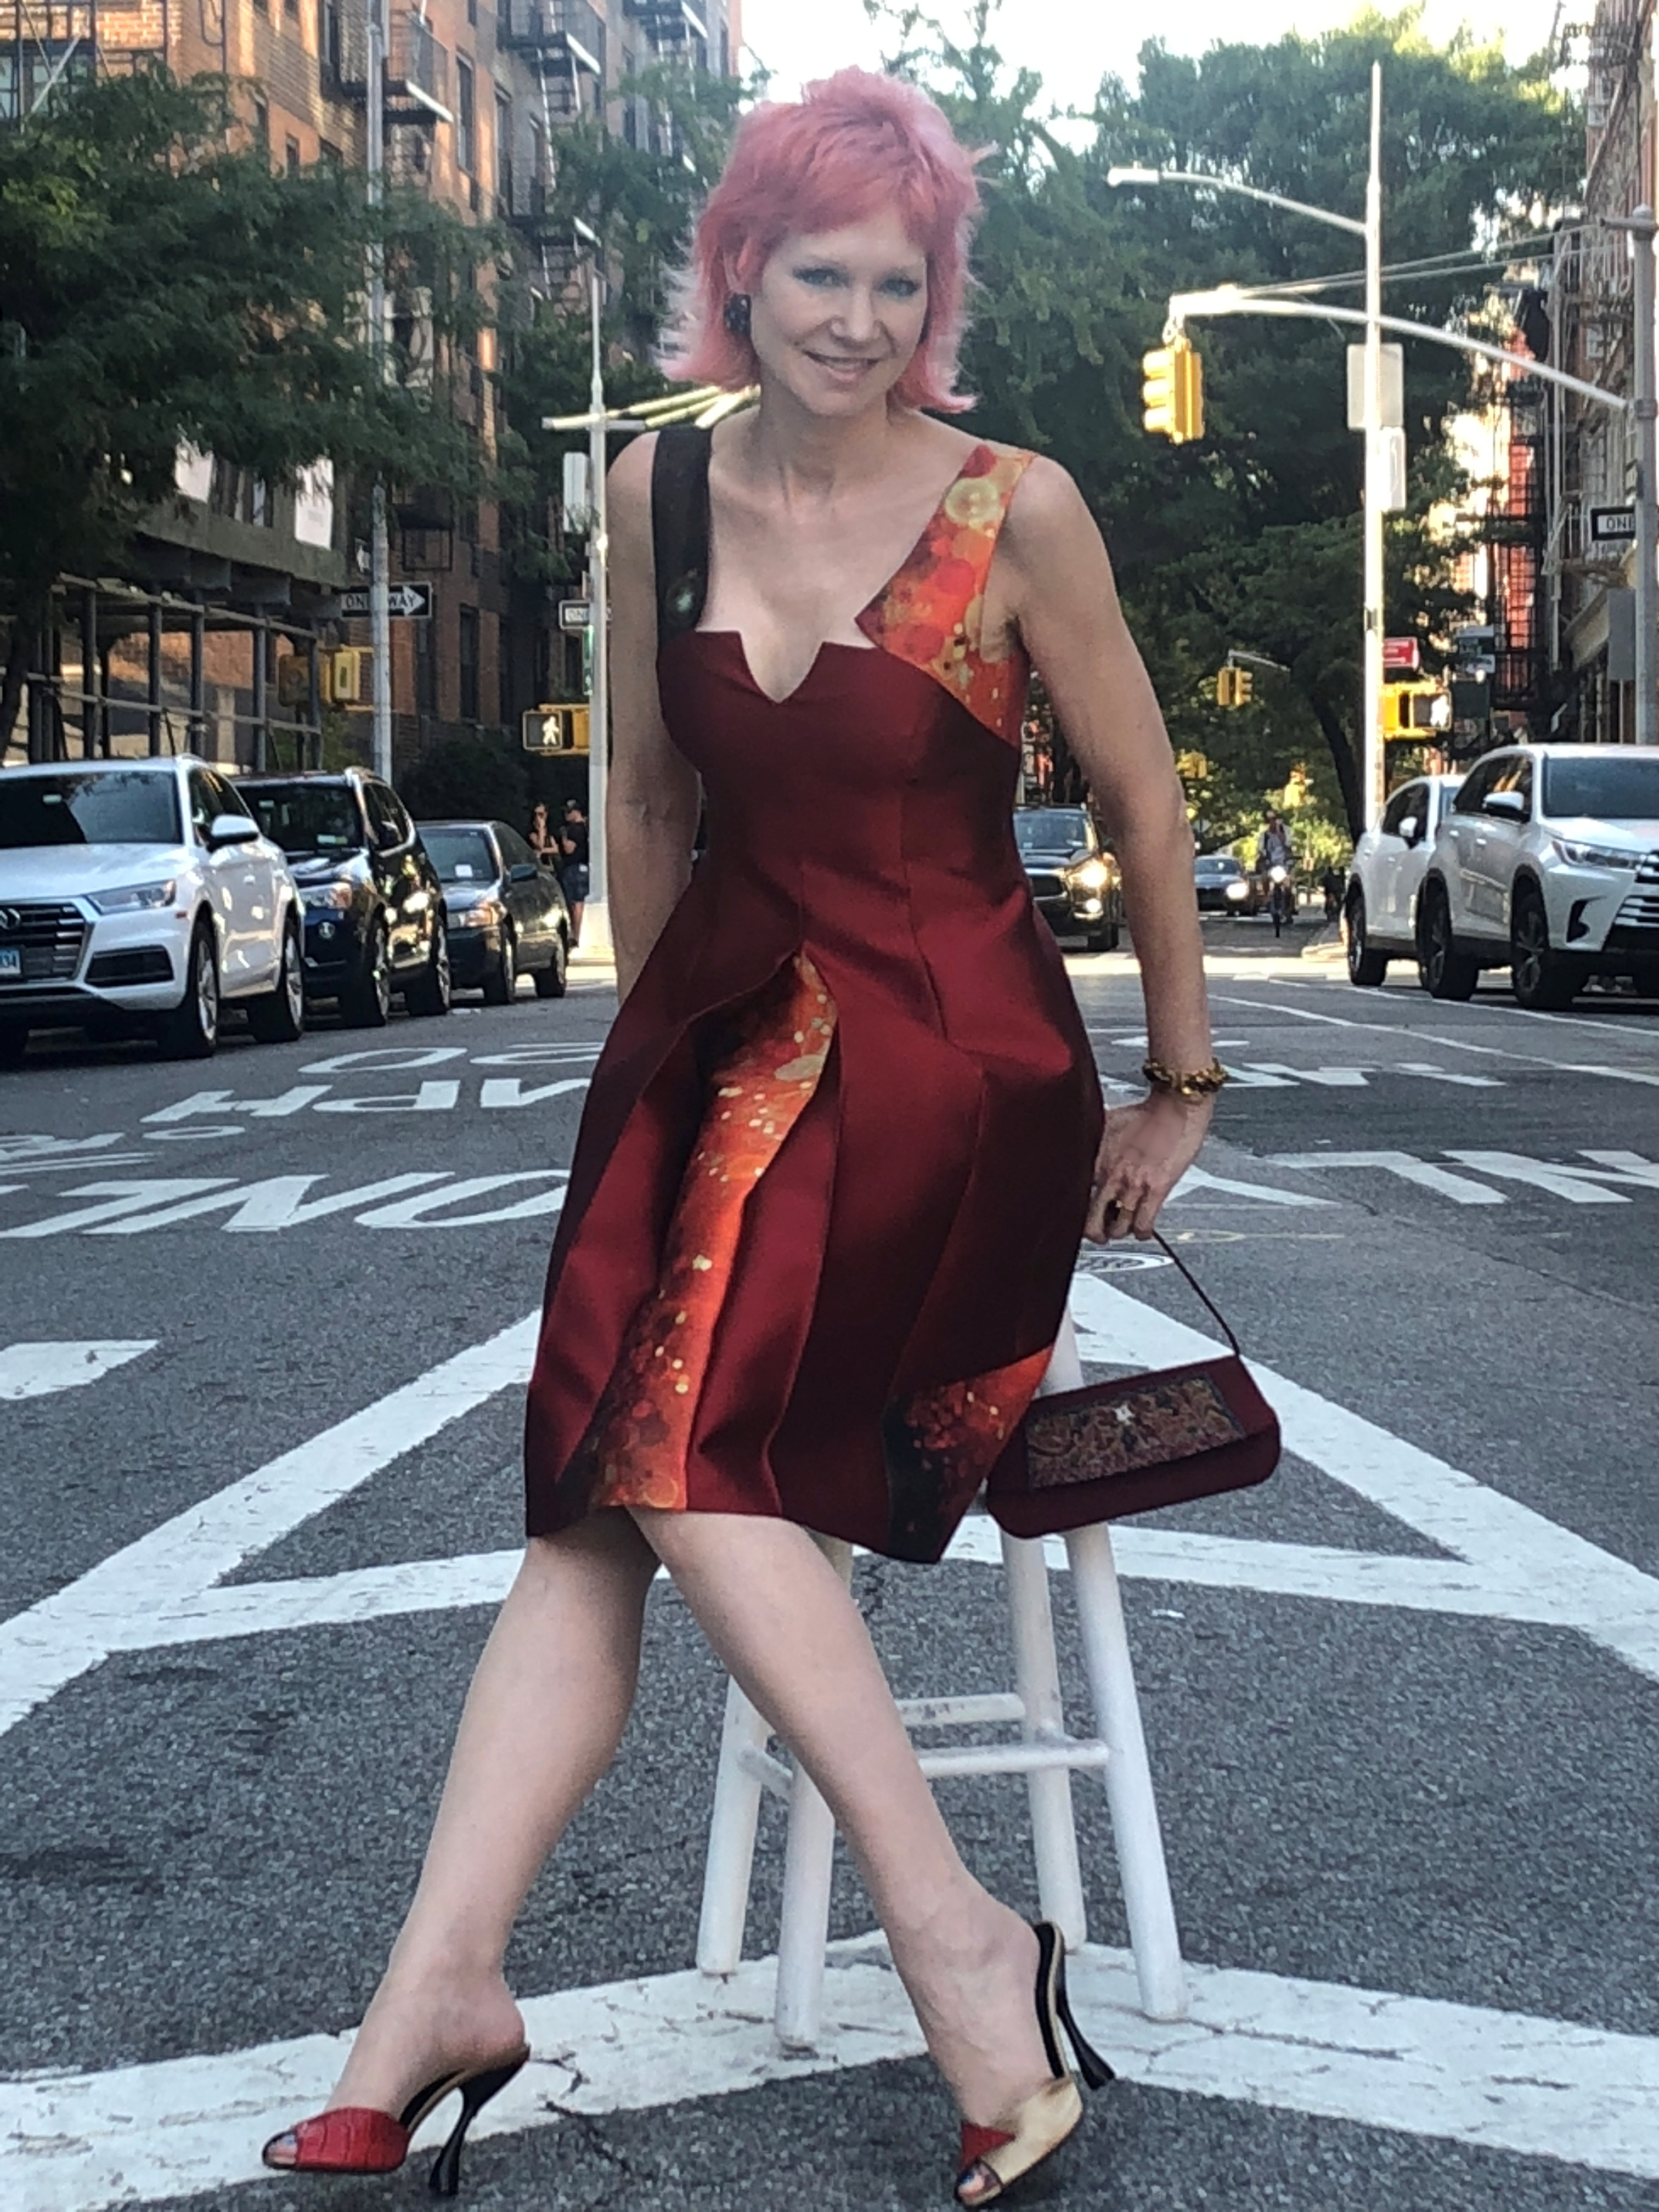 New York Model Karen Rempel - Karen's Quirky Style - Dominion Day Dress 2 by Engineered by Andrea T